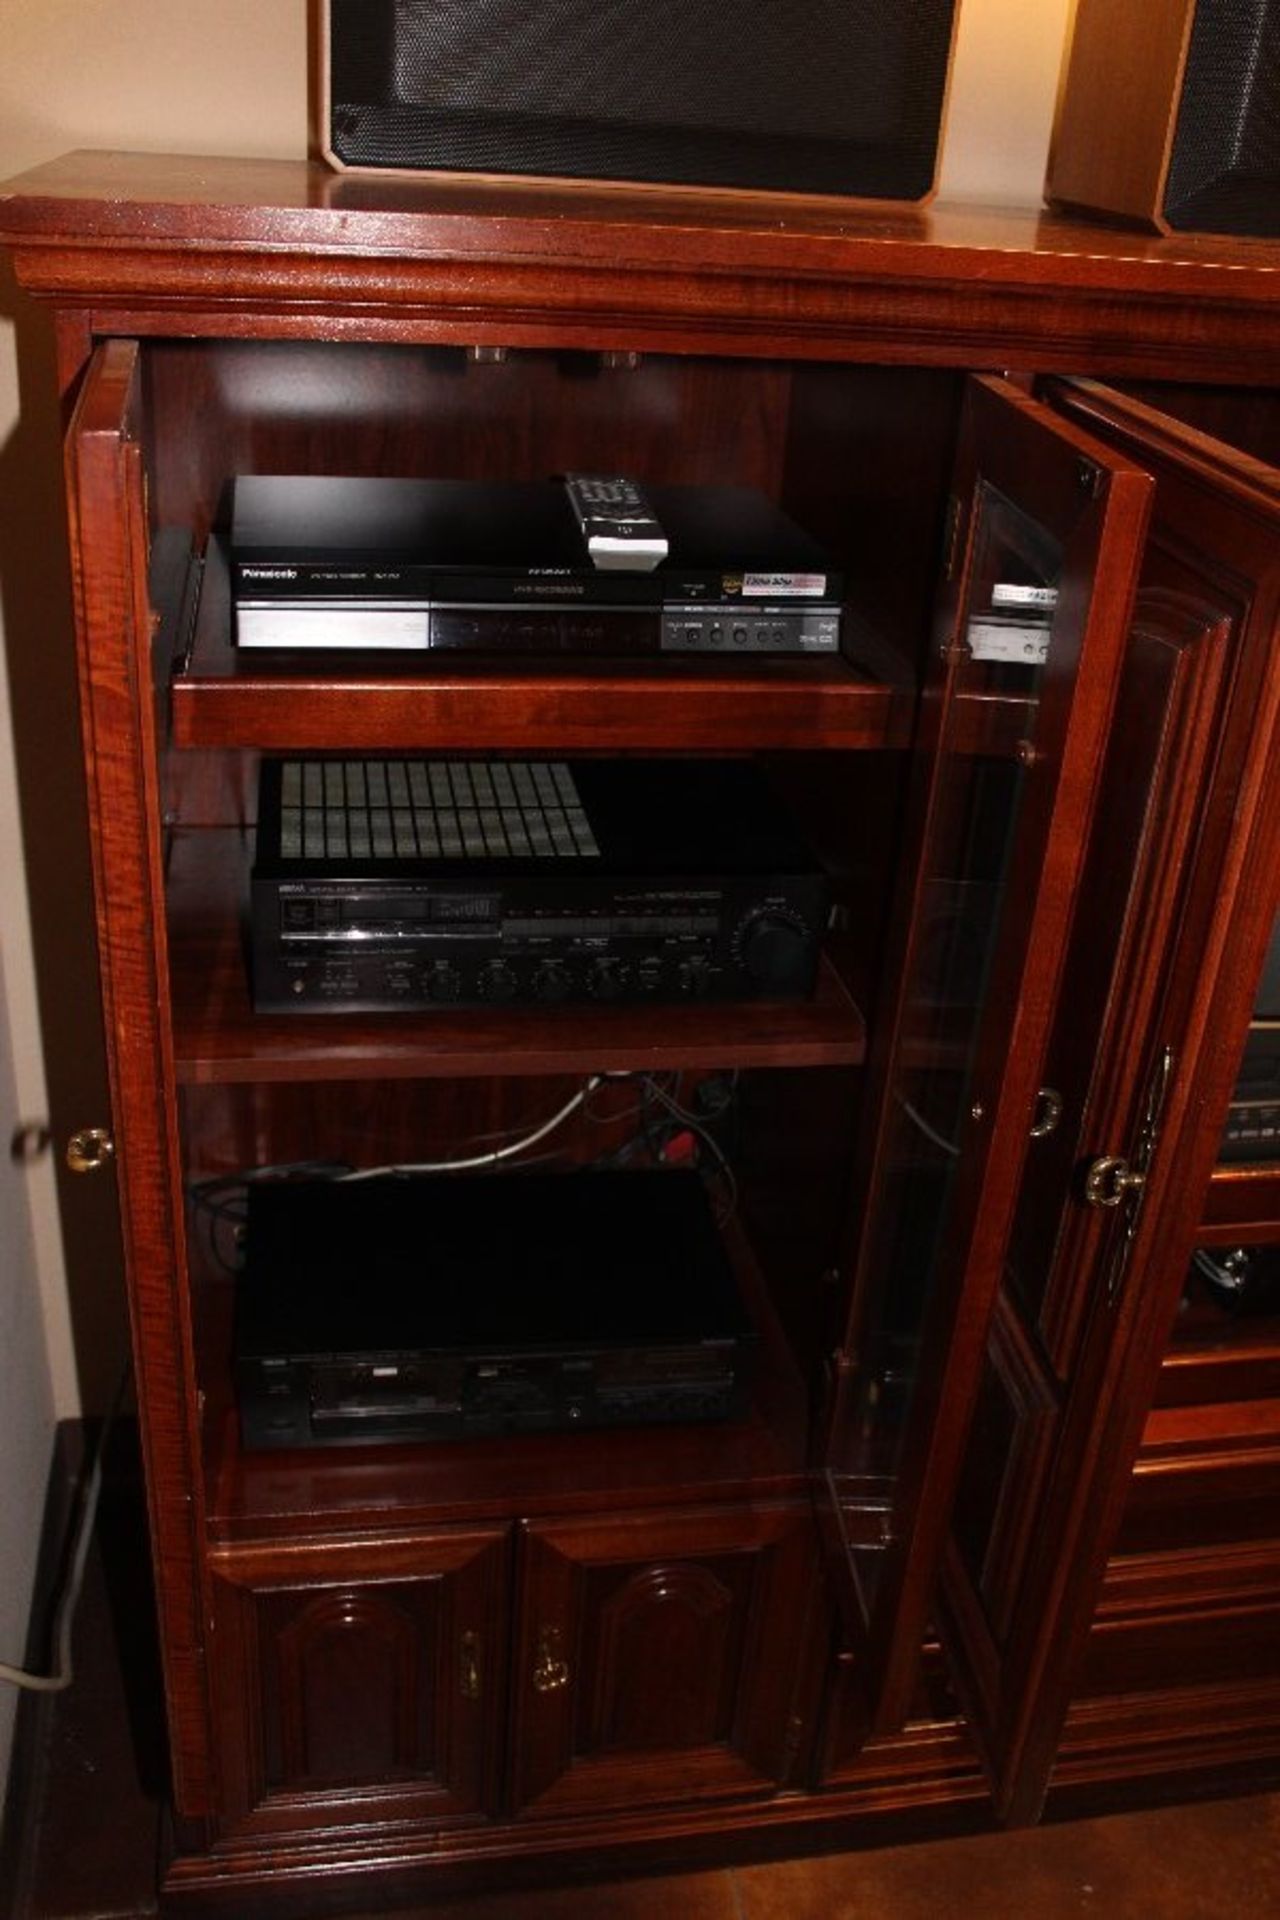 Anderson 20" DVD/VCR TV Combo, Panasonic DVD Recorder, Yamaha Receiver and Cassette Player, (2) - Image 2 of 3